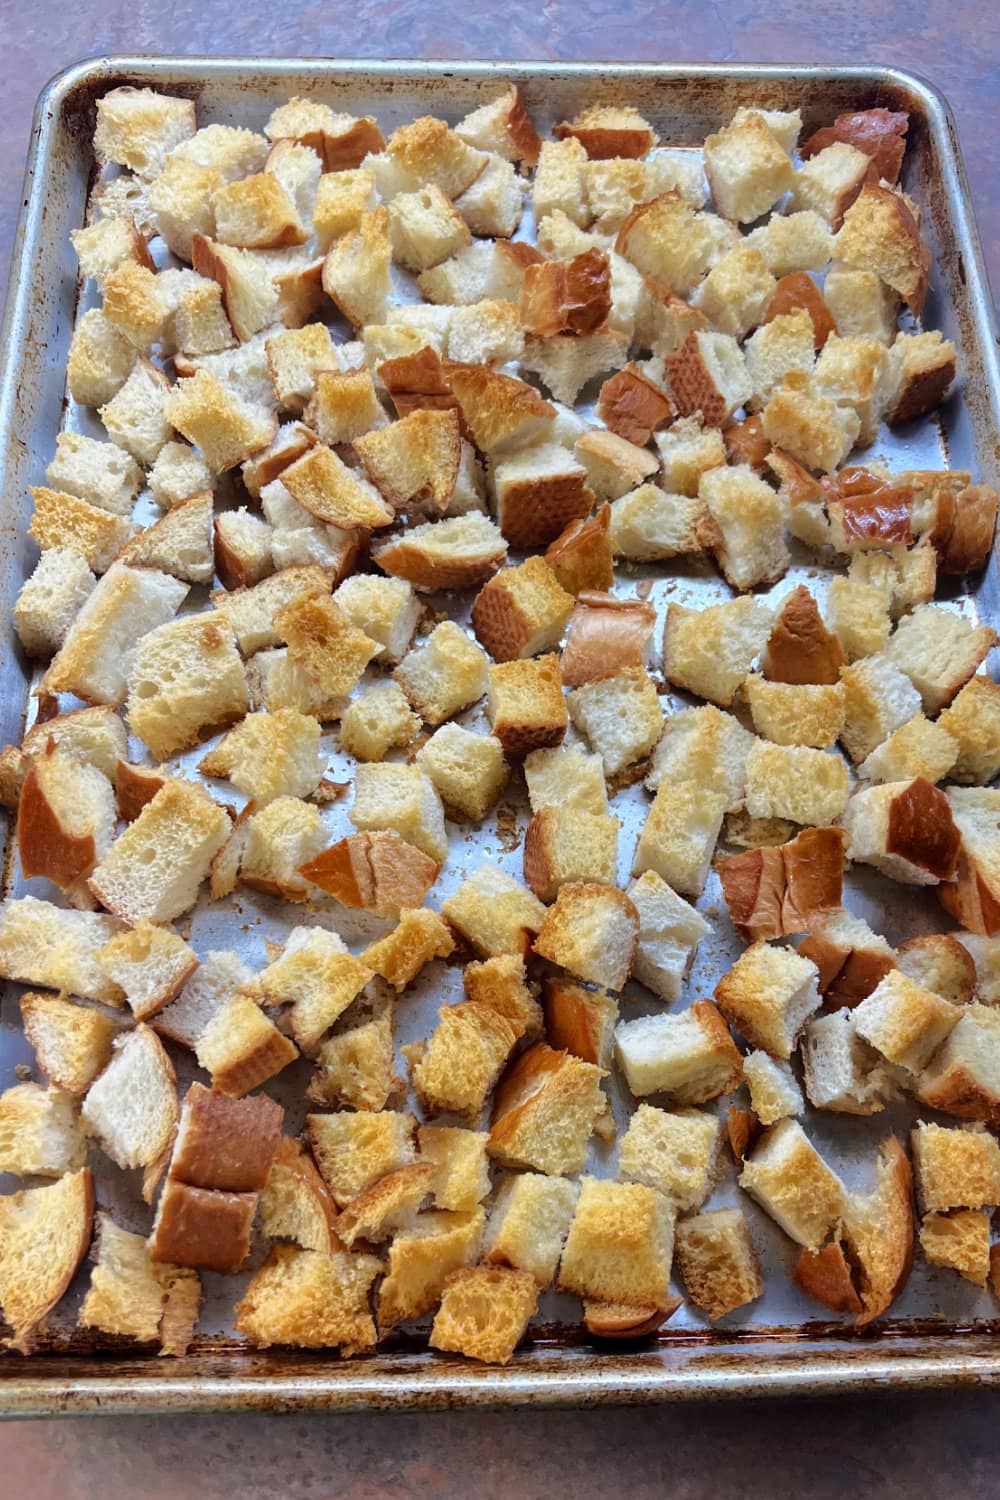 Bread cubes toasted until golden brown on a baking sheet.